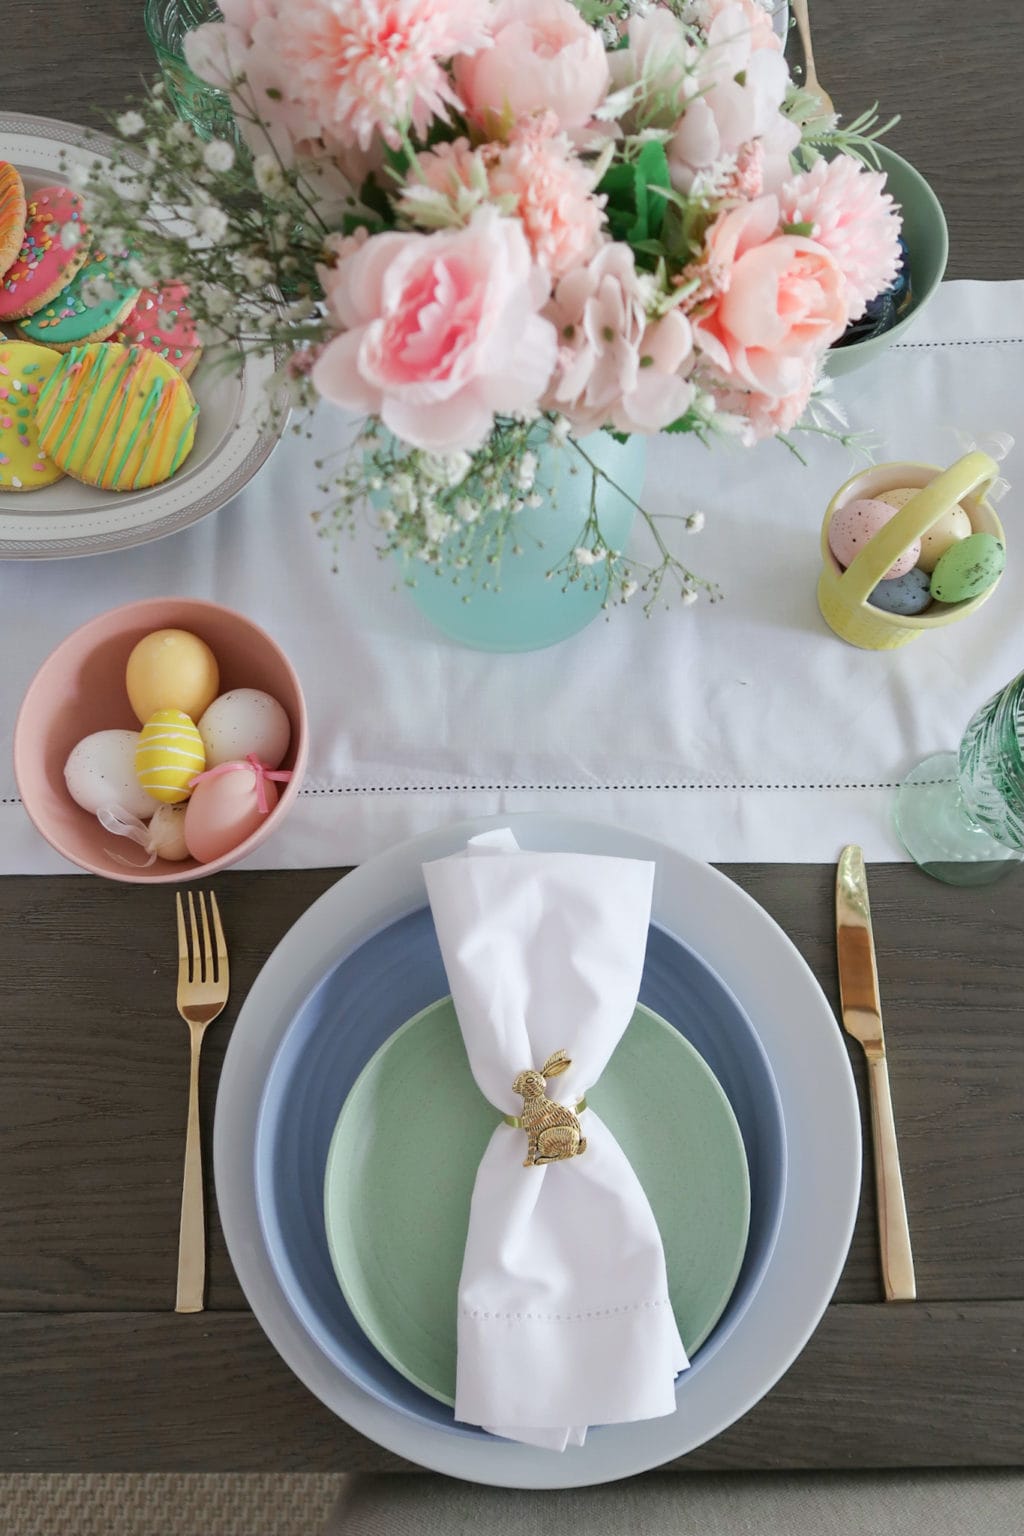 Our Spring Decor & Easy Easter Table • Honey We're Home